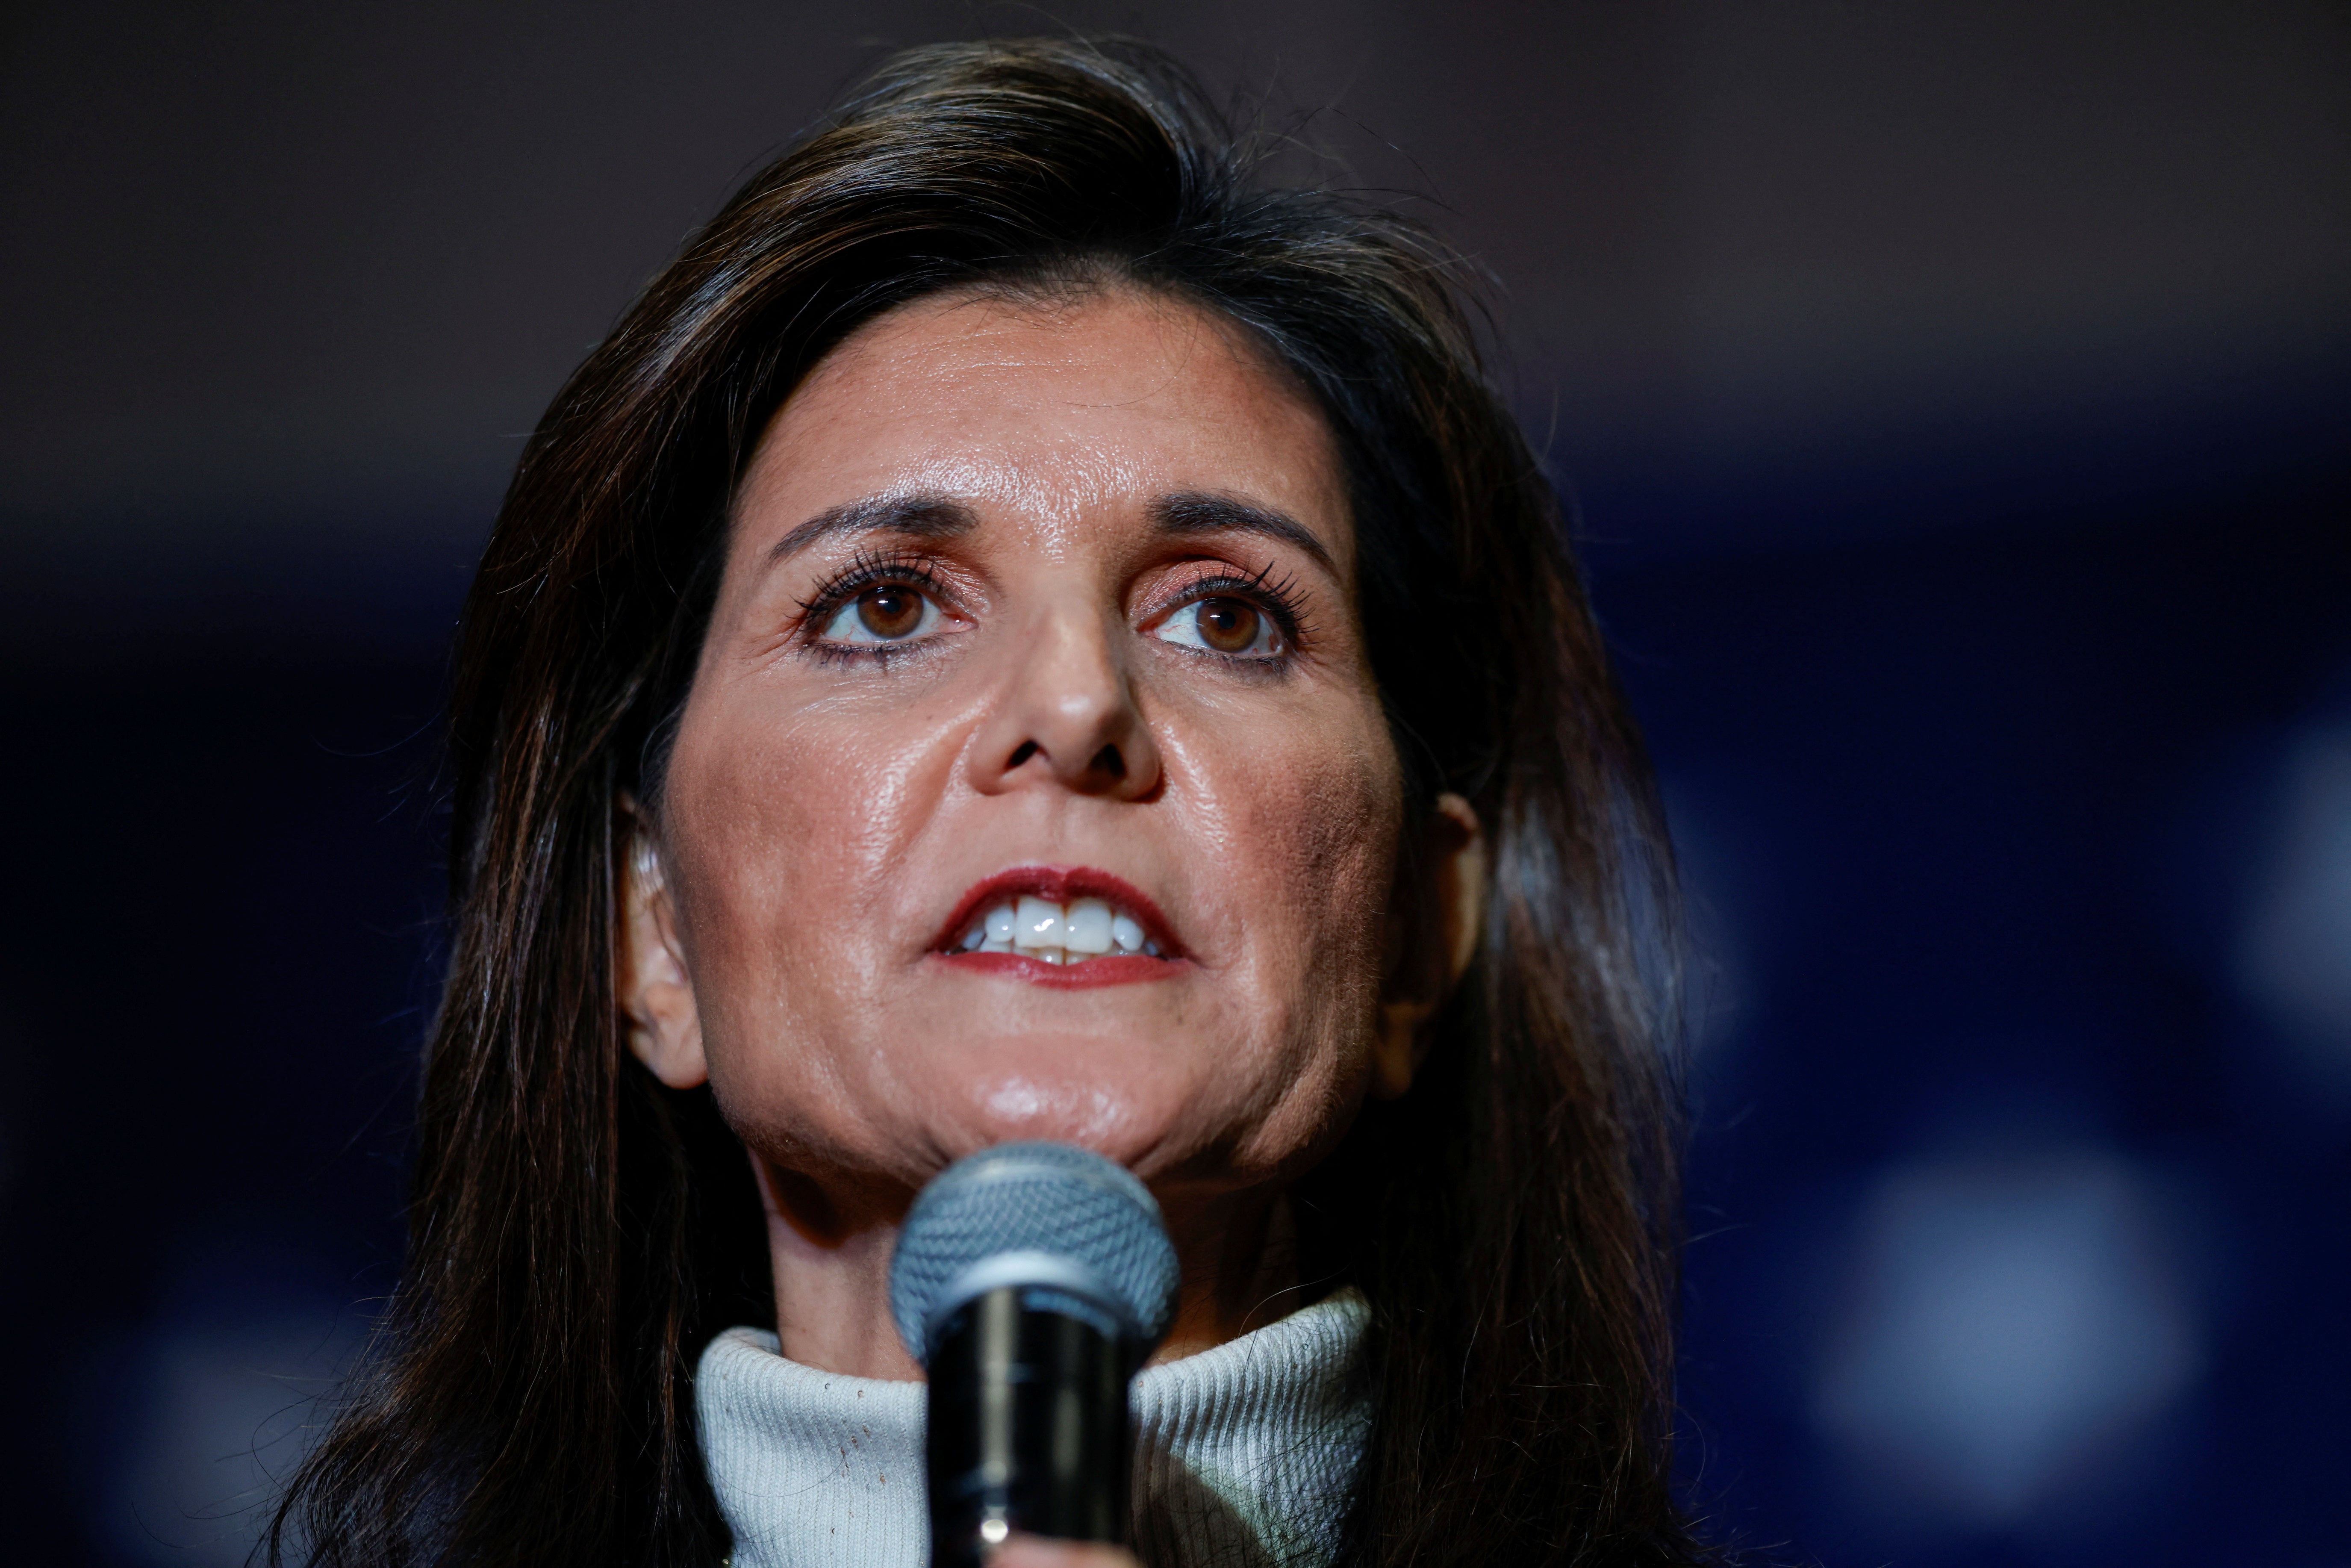 Republica presidential candidate Nikki Haley said she had been targeted twice by ‘swatting’ callouts in recent weeks